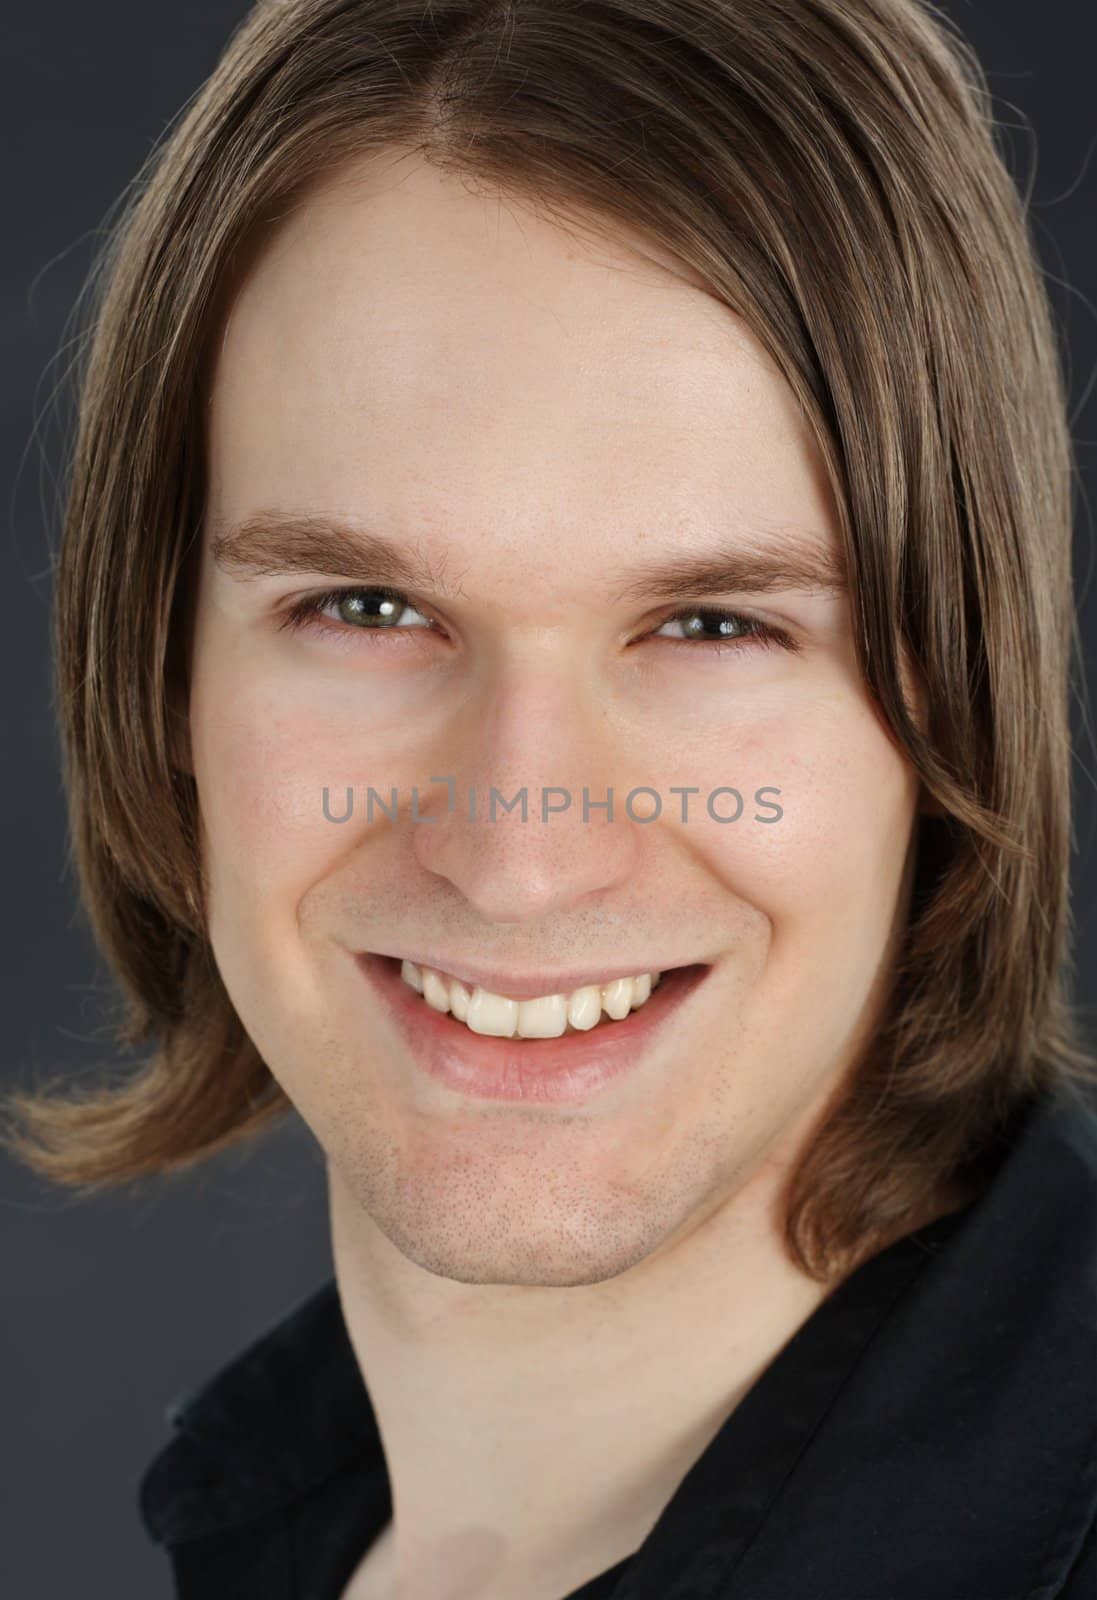 closeup portrait of young man, smiling, isolated on white